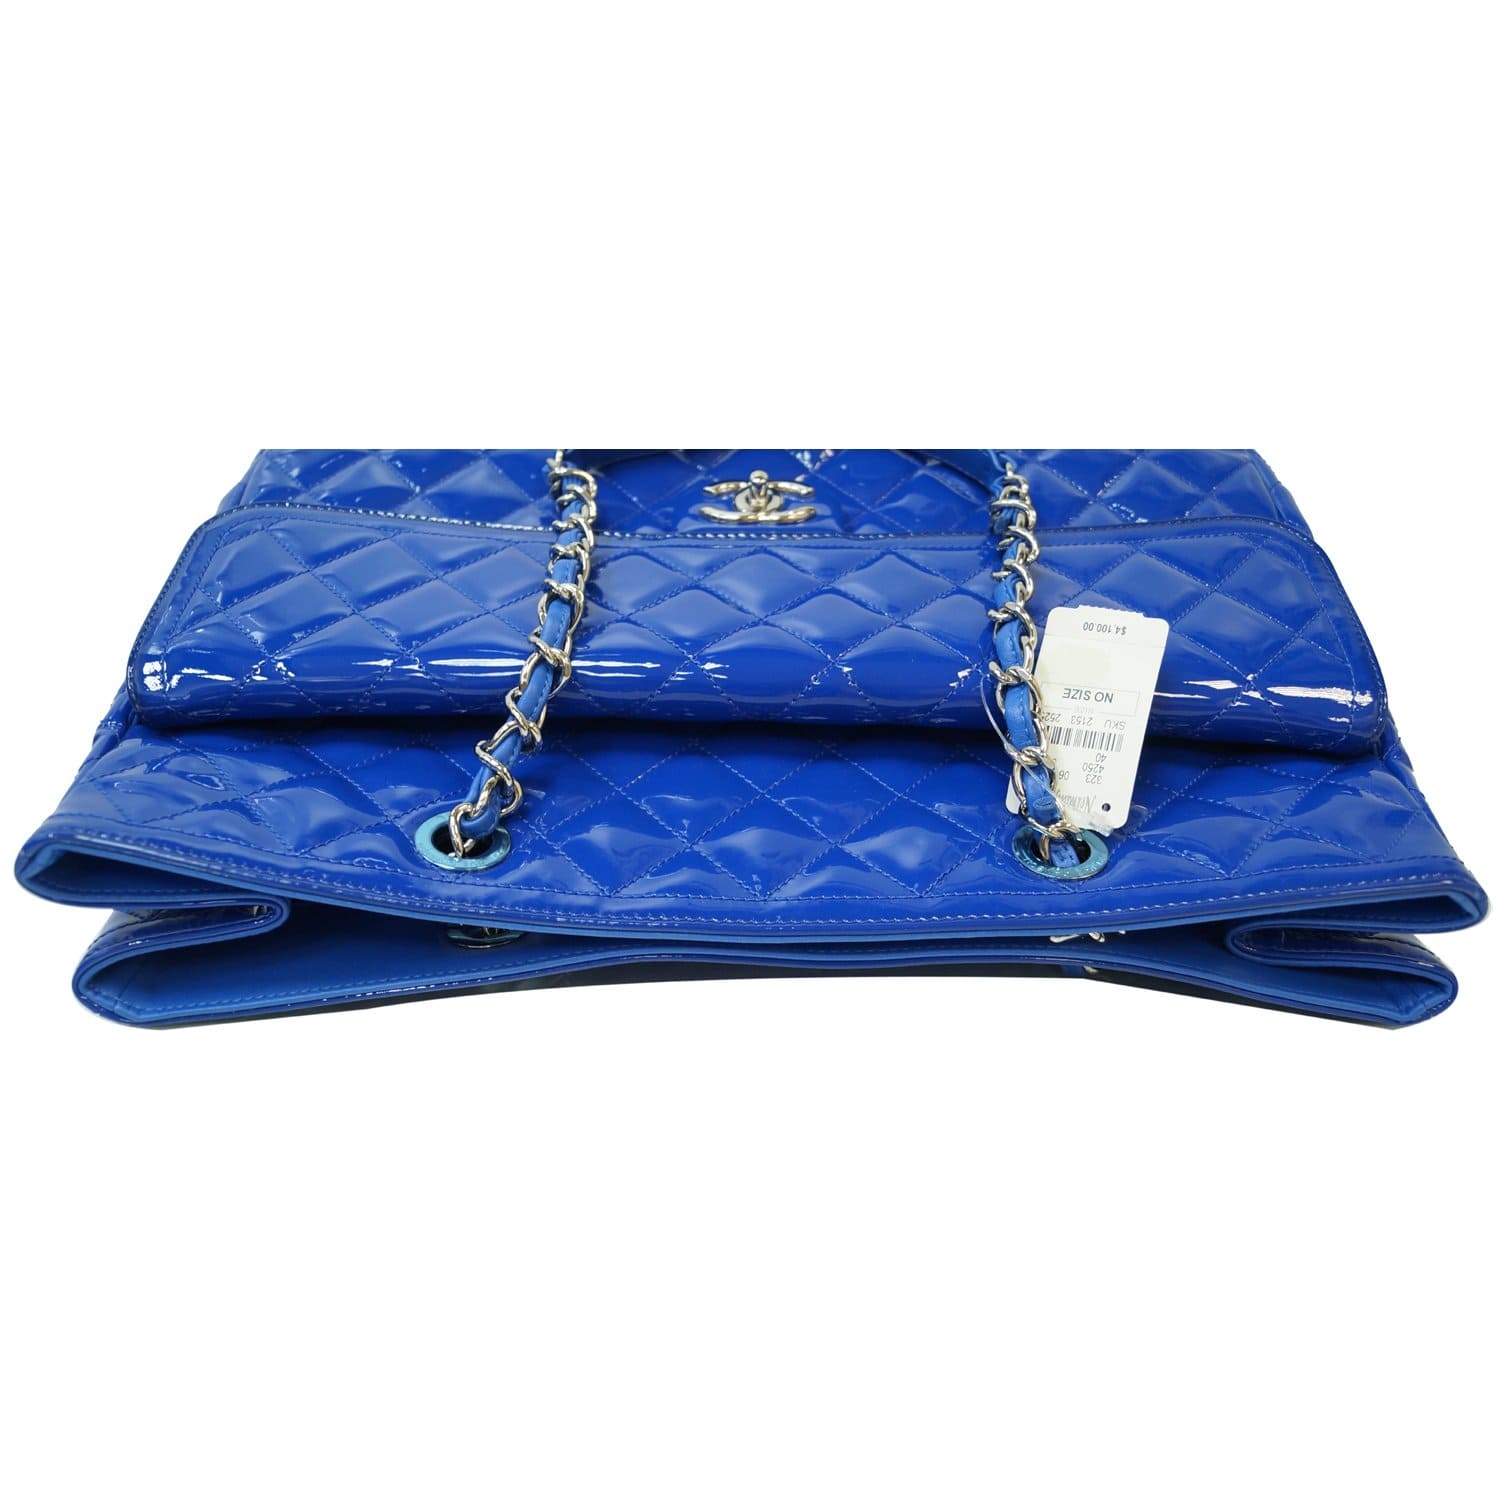 Chanel Large Royal Blue Bag NEW NOW 4200  The White Dress Agency